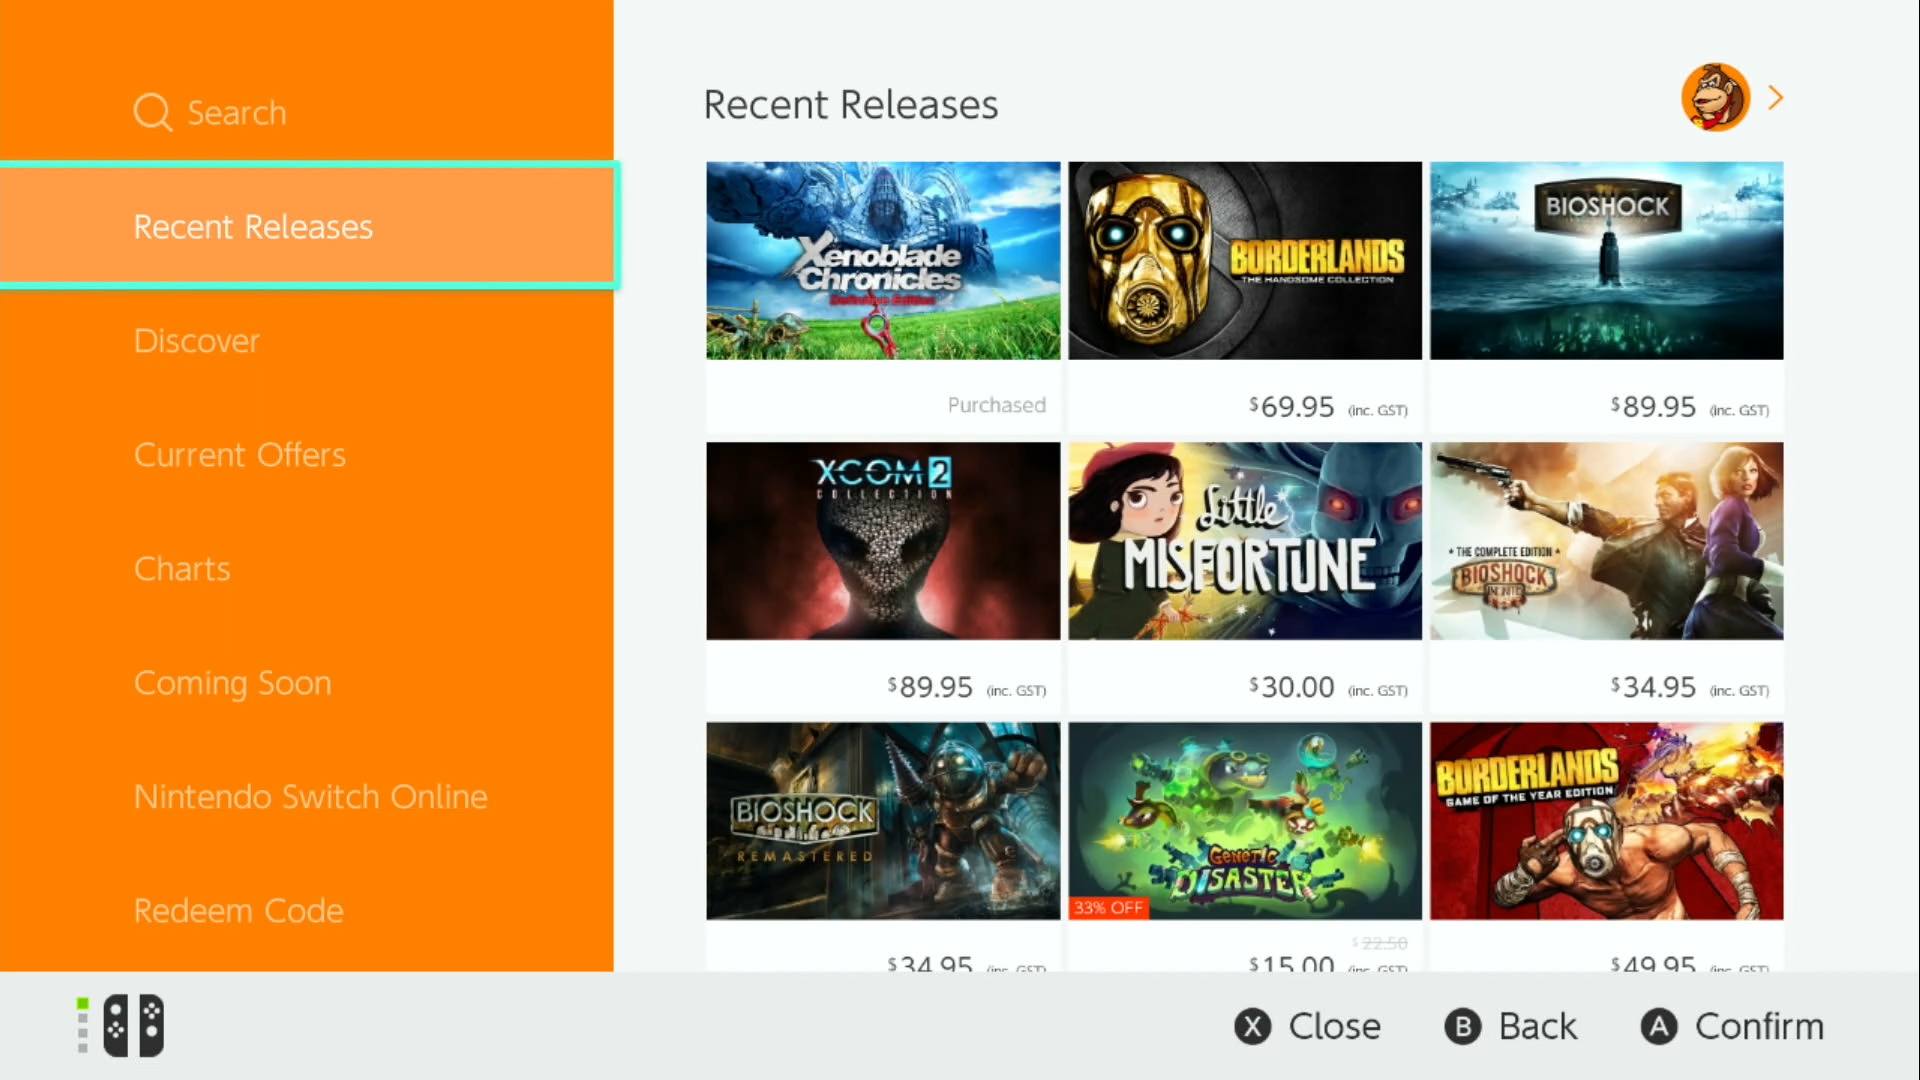 Here's our handy guide to buying games from Nintendo eShop: IMG